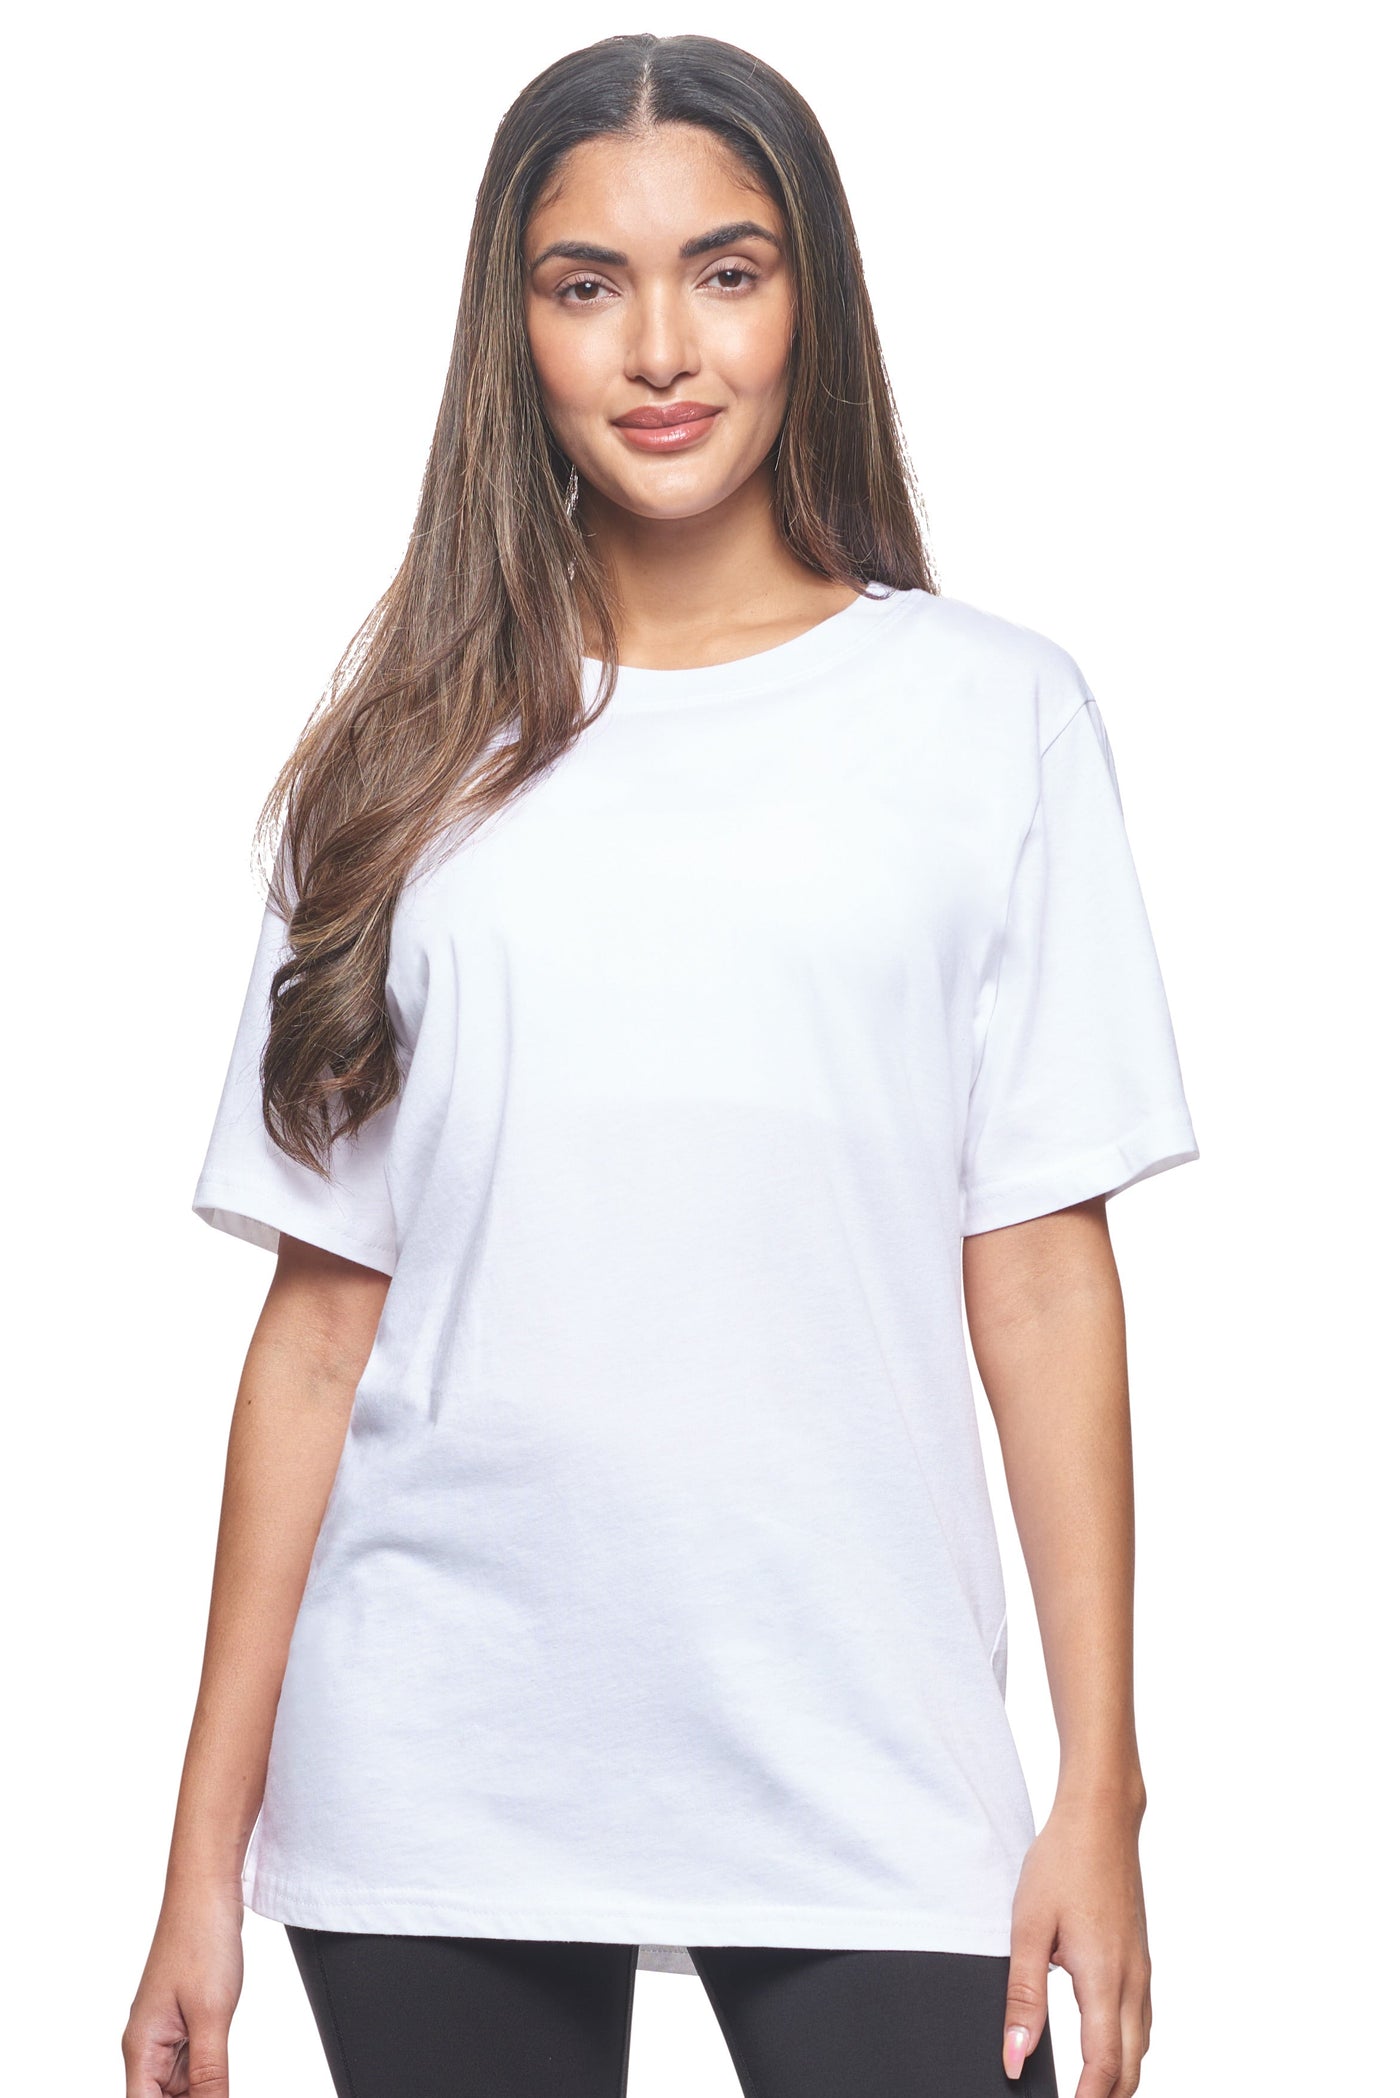 Expert Brand Retail Organic Cotton T-Shirt Made in USA Women's White#color_white